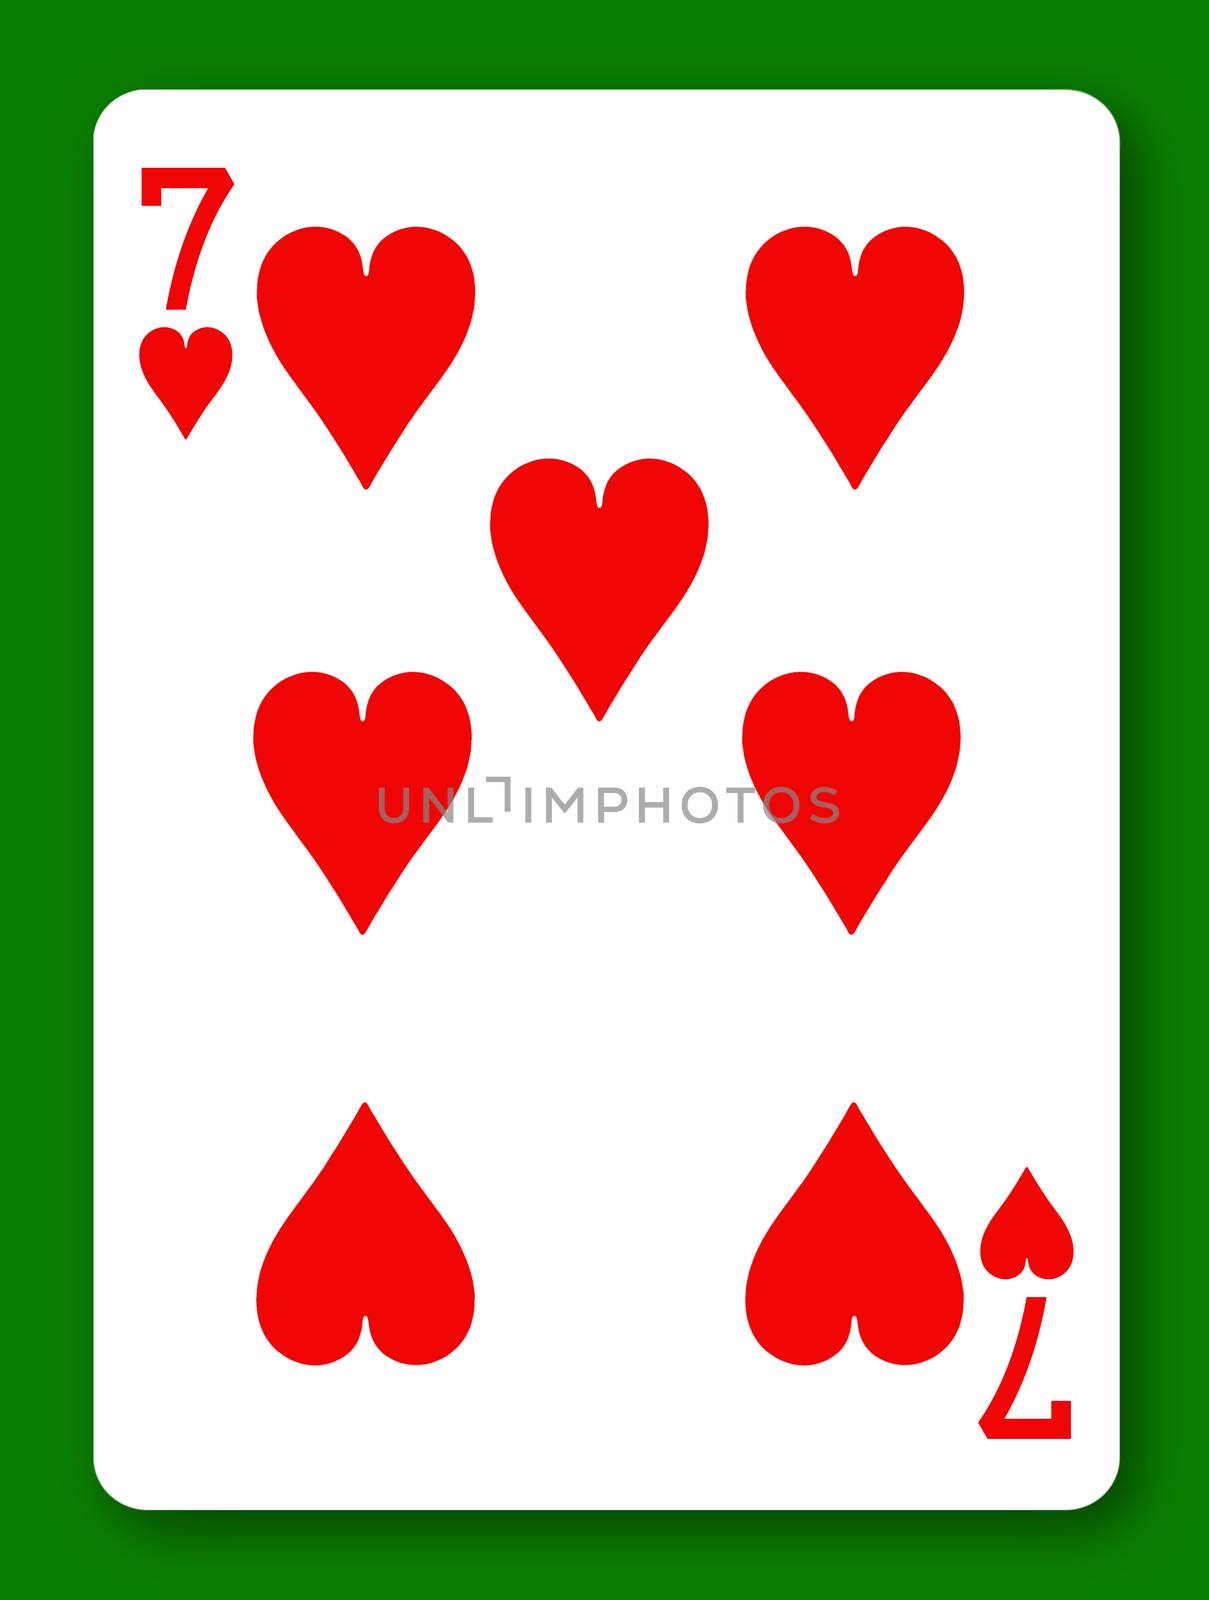 A 7 Seven of Hearts playing card with clipping path to remove background and shadow